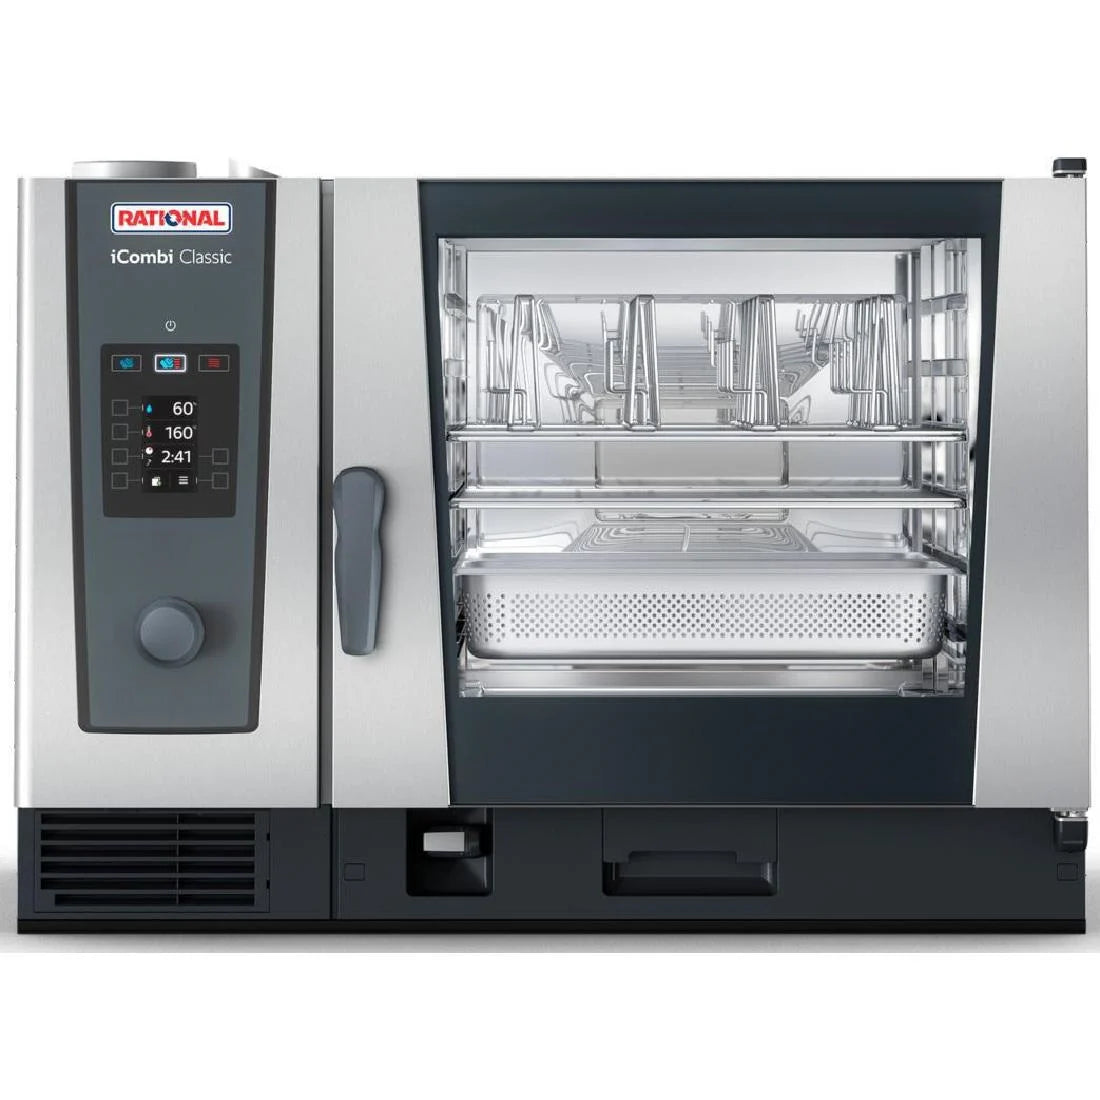 RATIONAL ICOMBI CLASSIC COMBI OVEN ICC 6-2/1/E .Product Ref:00661.Model:ICC 6-2/1/E 🚚 3-5 DAYS DELIVERY